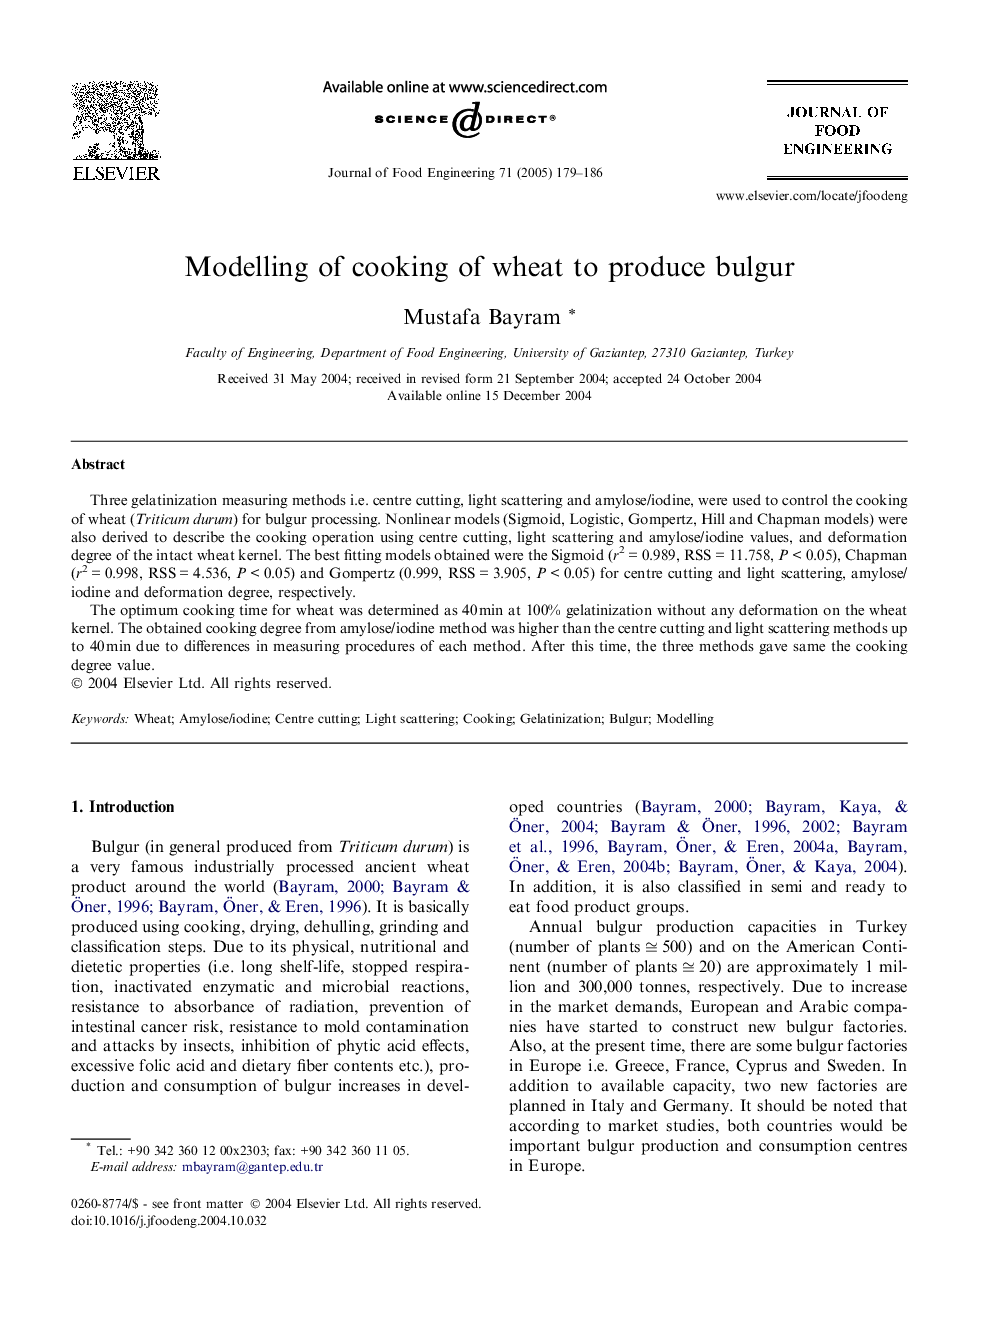 Modelling of cooking of wheat to produce bulgur